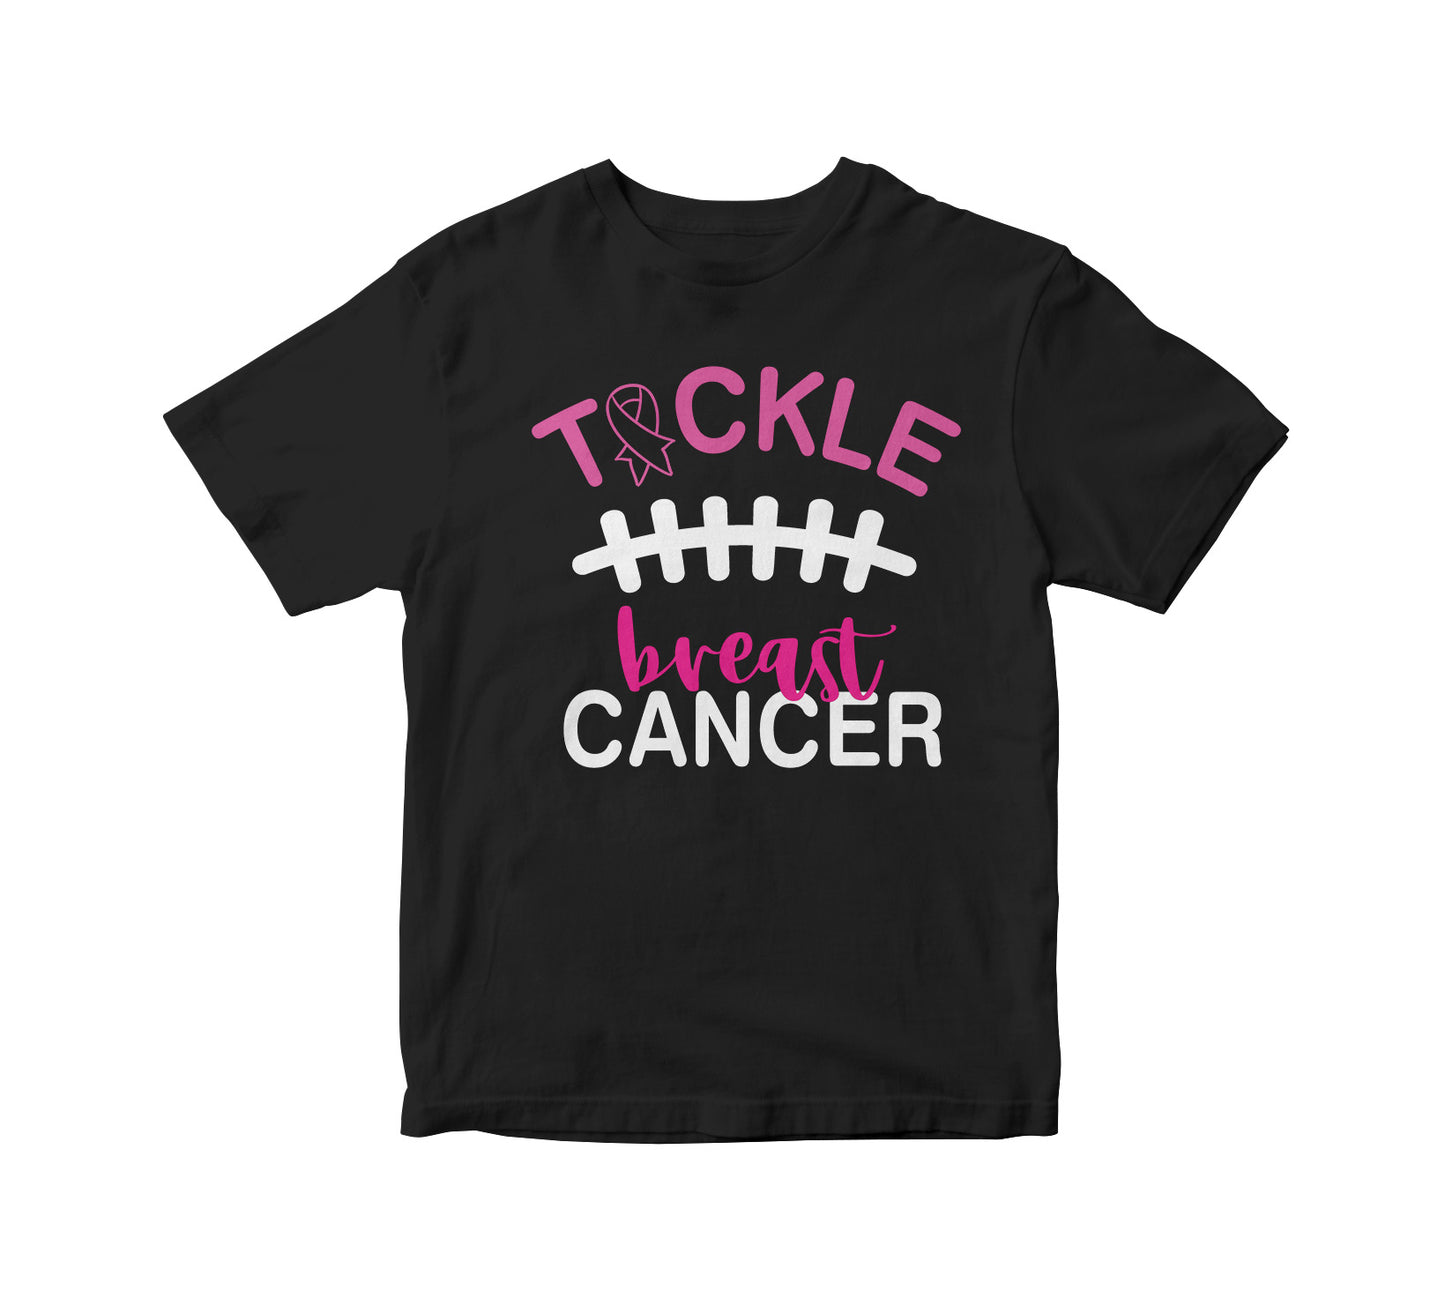 Tackle Breast Cancer Adult Unisex T-Shirt